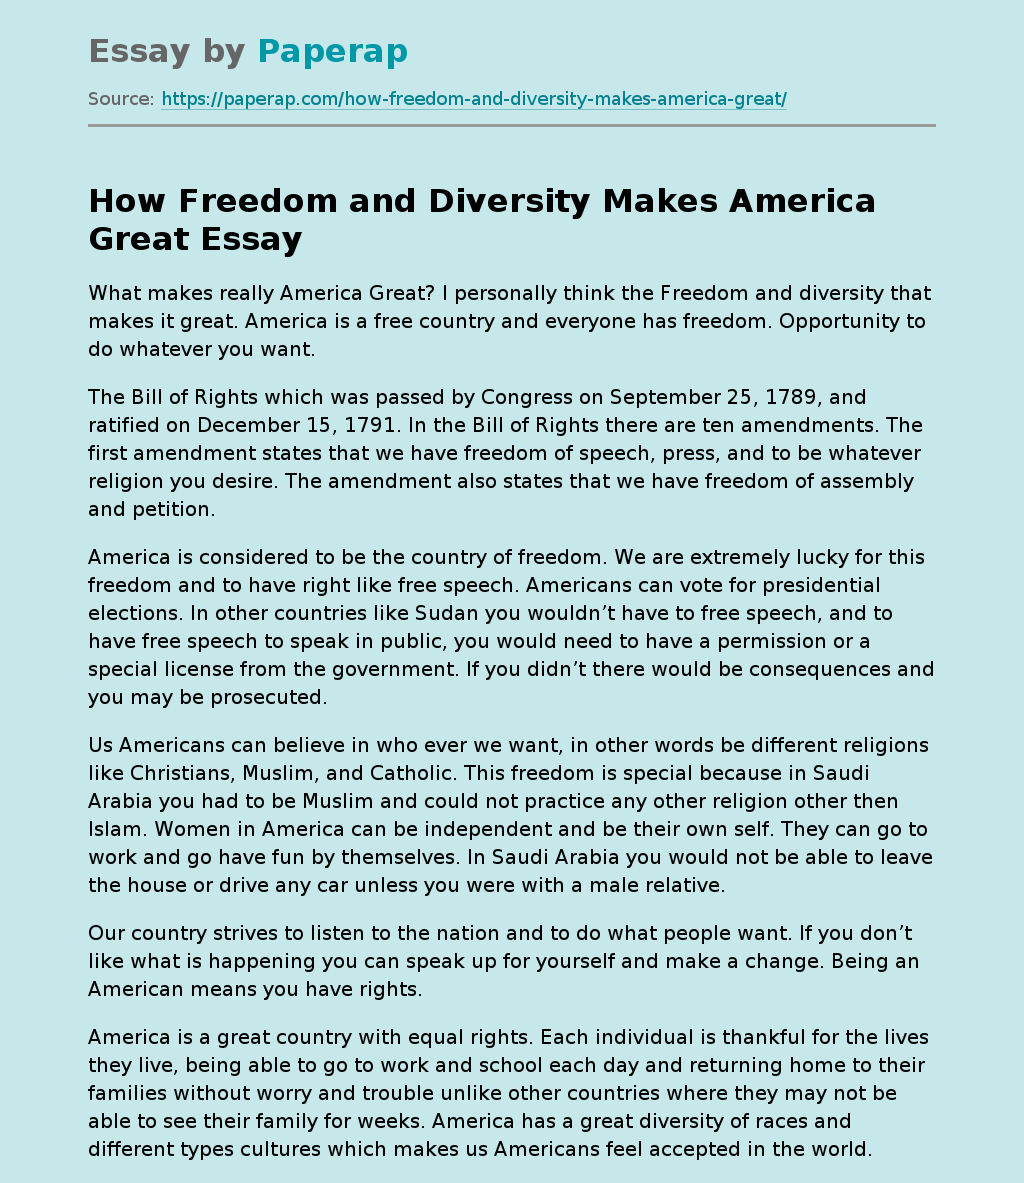 How Freedom and Diversity Makes America Great